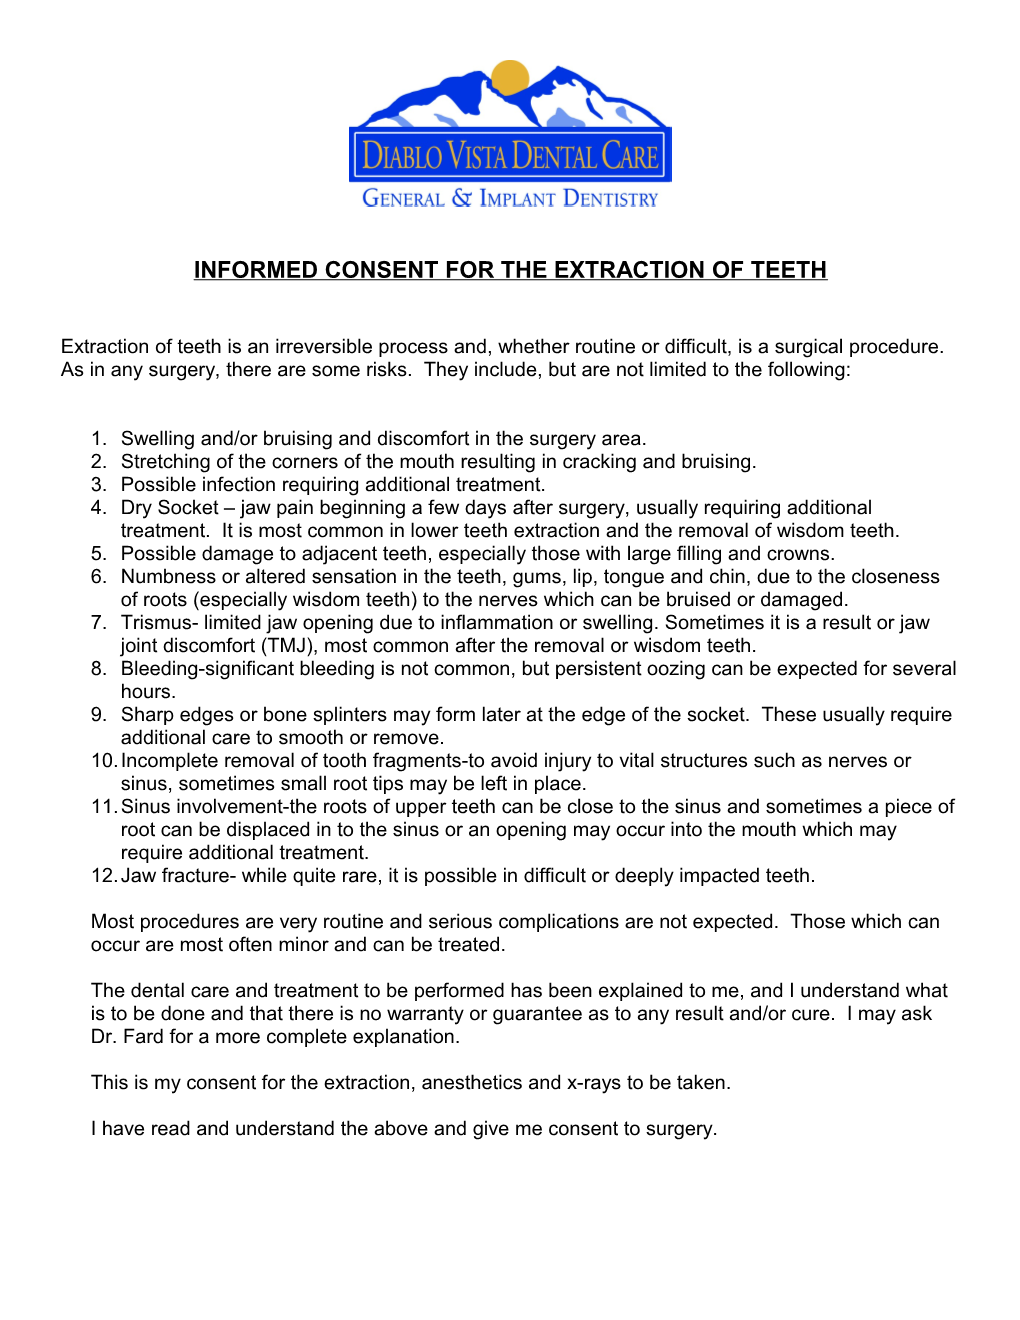 Consent for the Extraction of Teeth